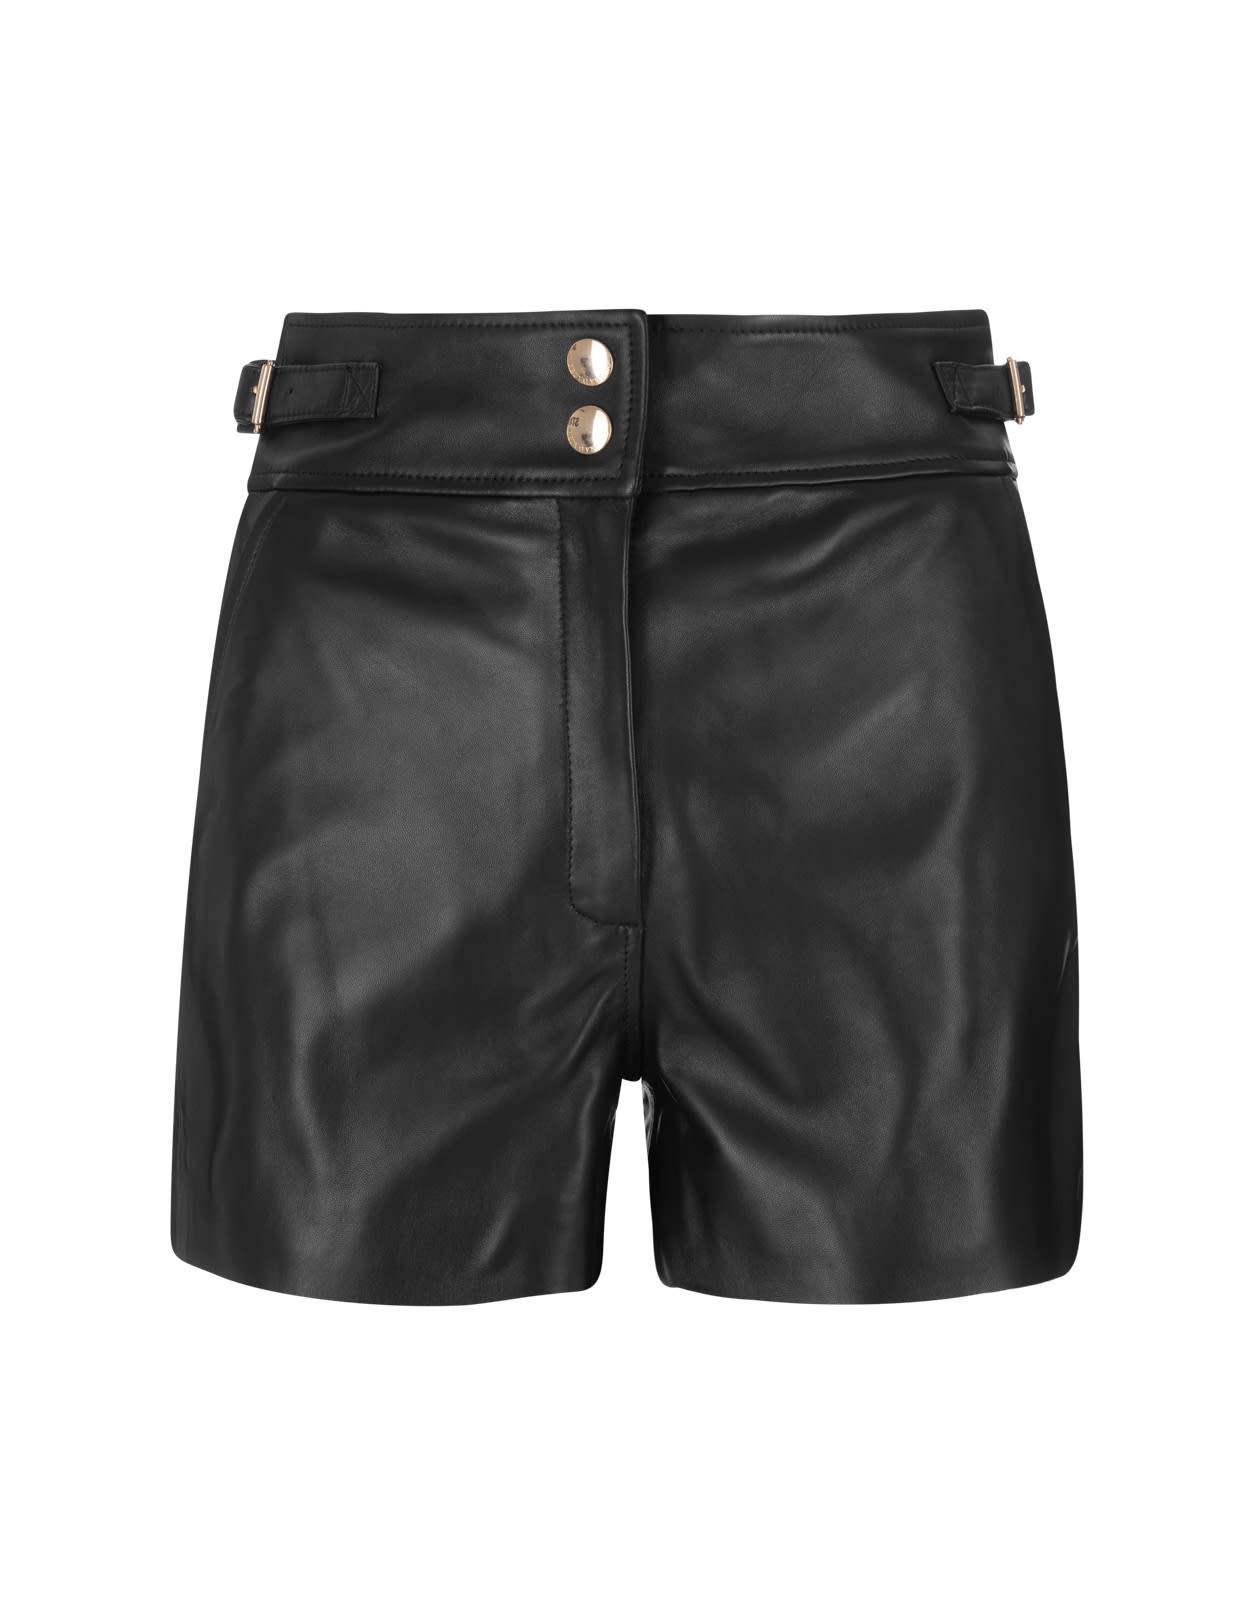 RED Valentino Woman Black Leather Shorts With Buckles